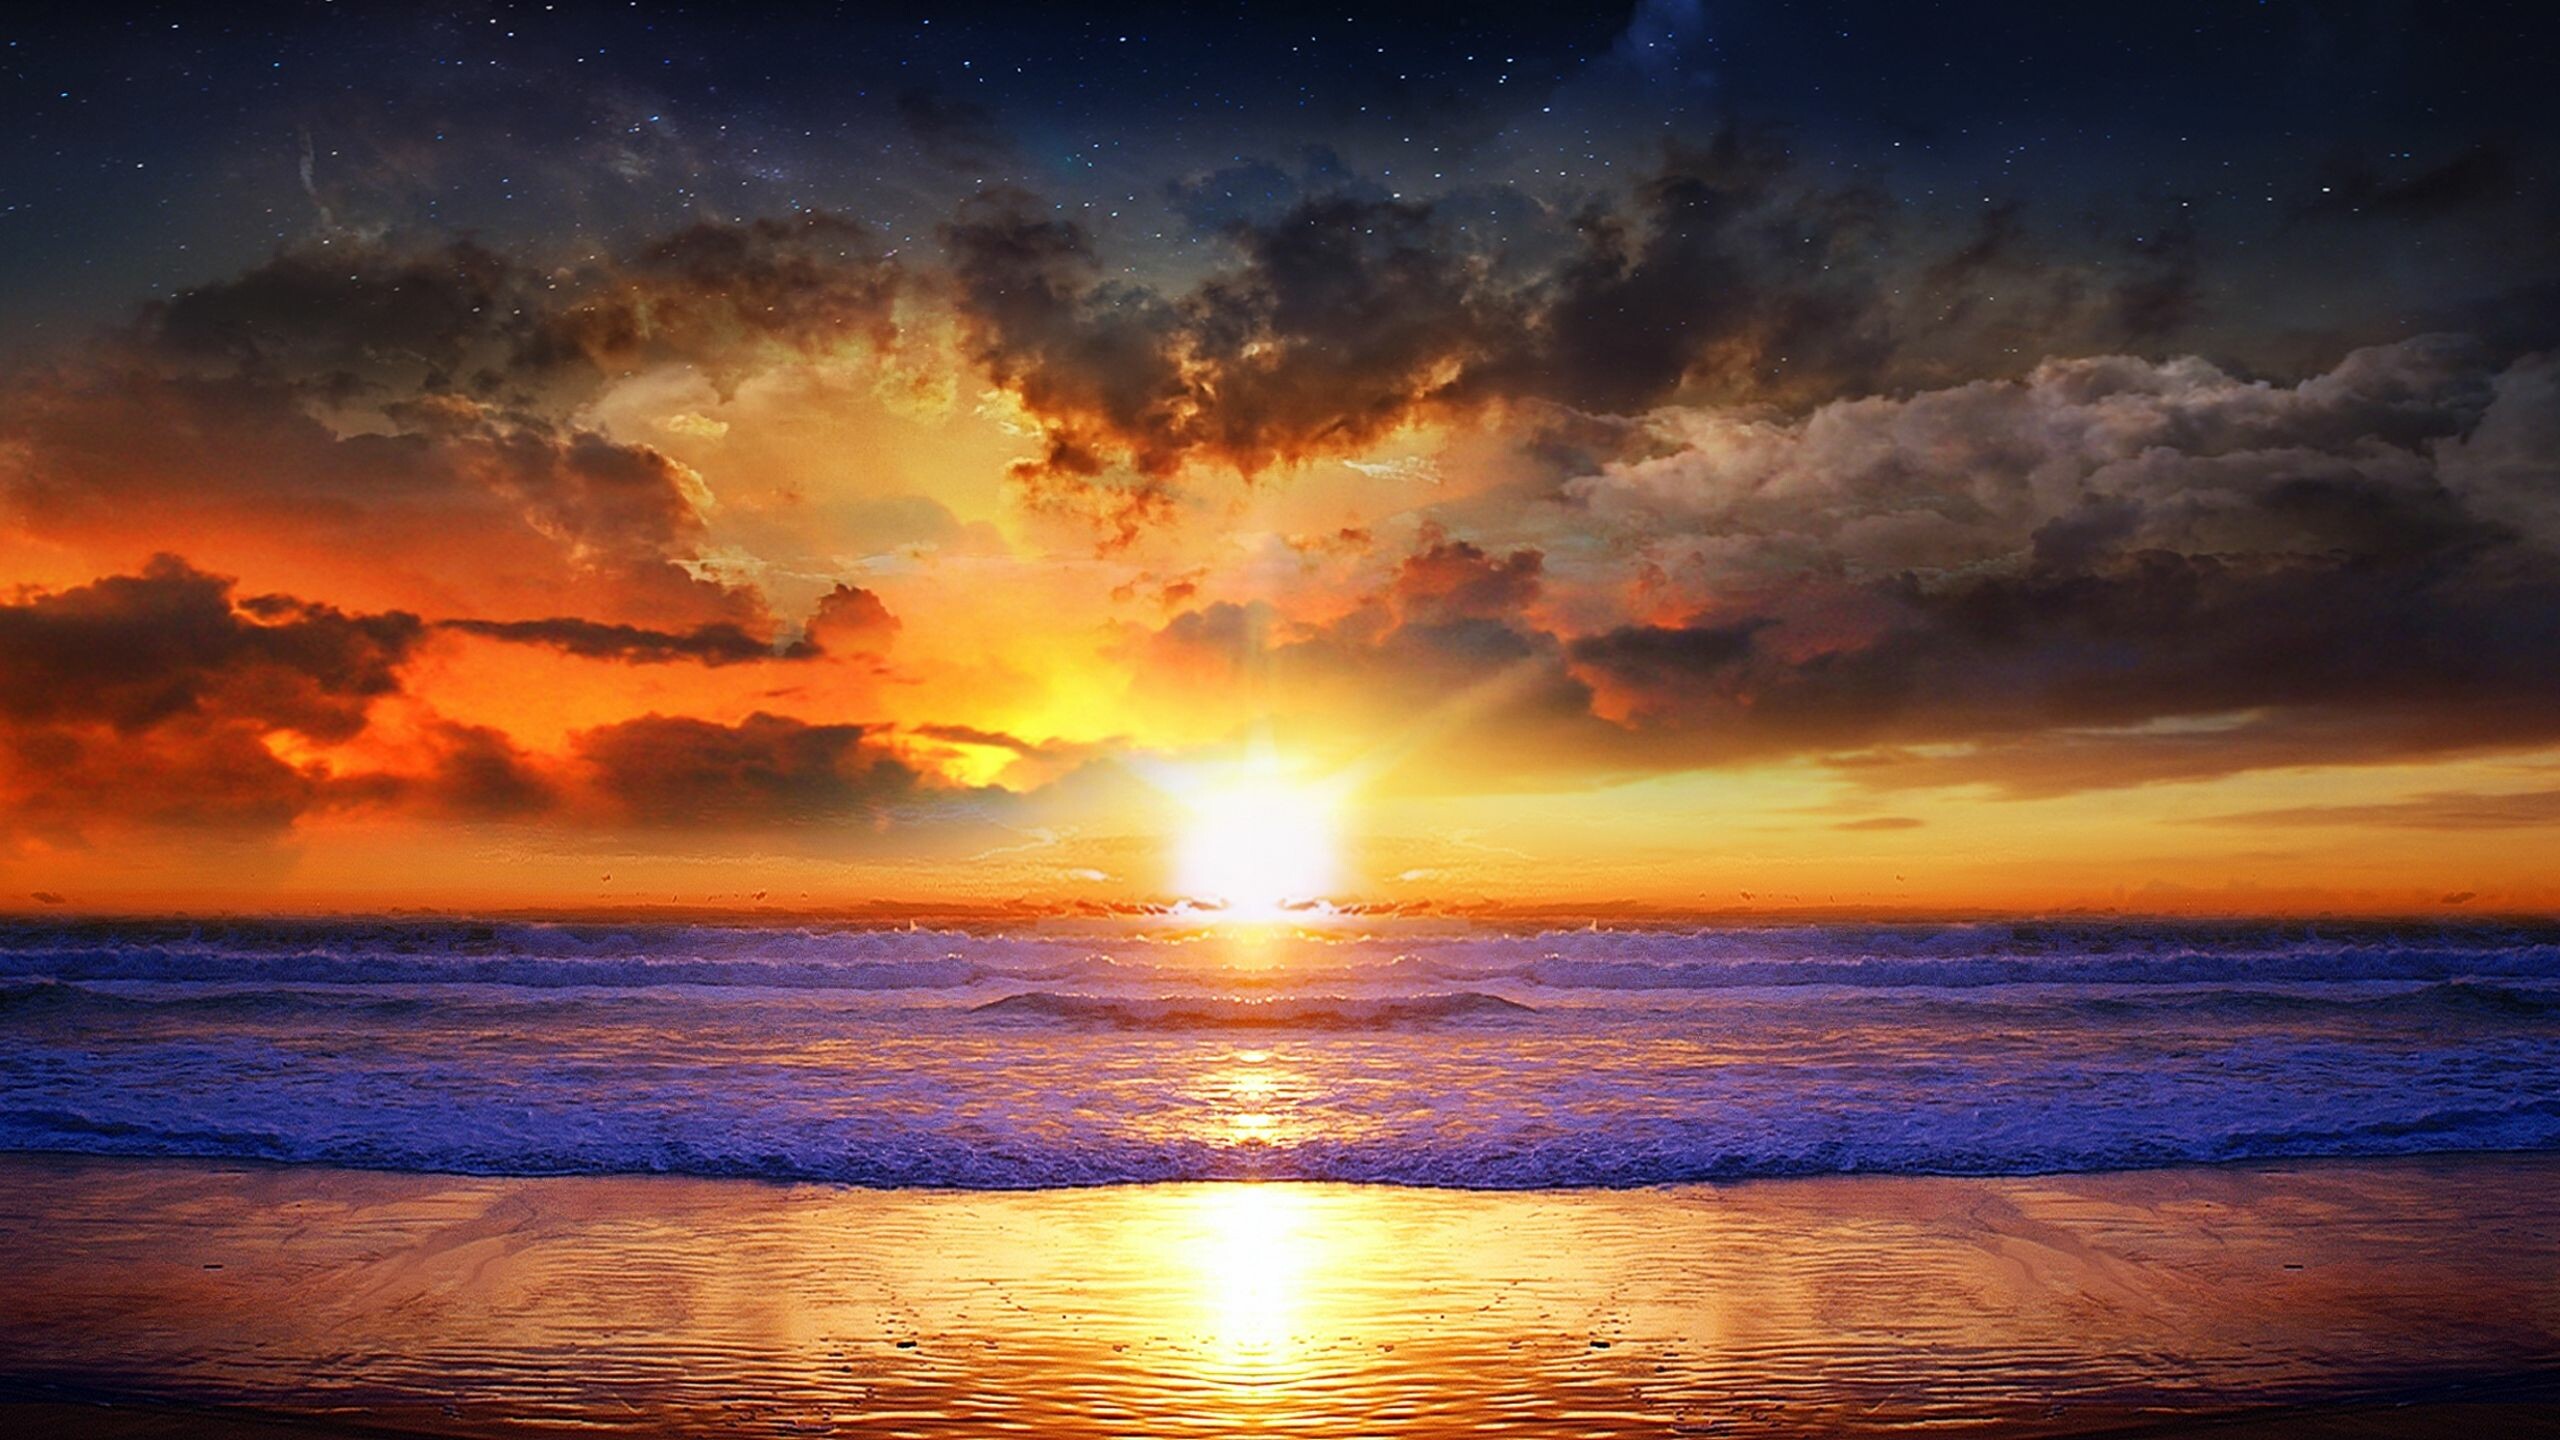 Sunrise: Sunup, Ascent of the sun above the horizon in the morning, Maritime scenery. 2560x1440 HD Wallpaper.